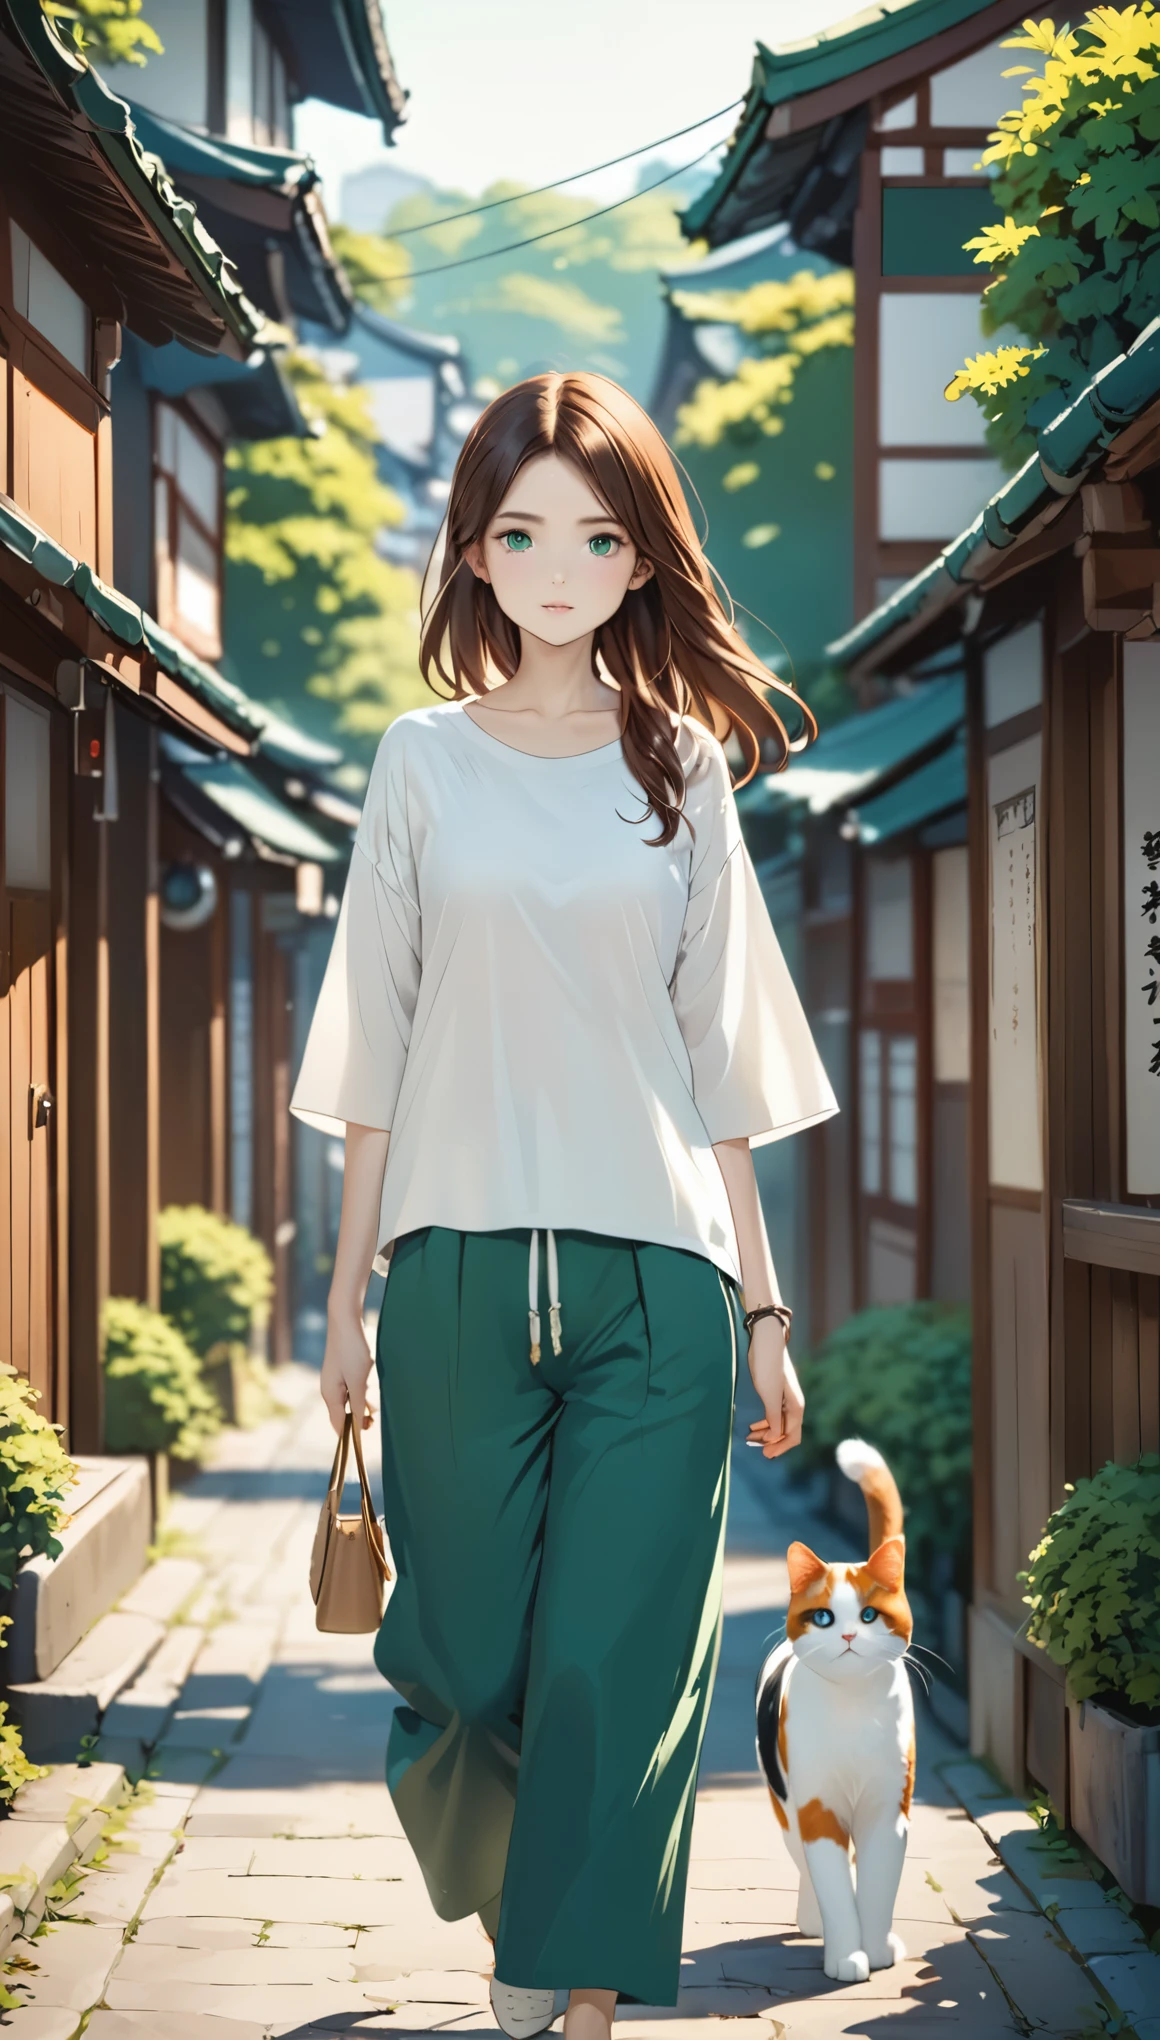 A girl and a calico cat、pretty girl、Calico cat walking with a girl、A girl and a calico cat walking on a promenade、PrintＴshirt、3/4 length pants、Old Japan cityscape、Green Road、Different world、Create silence、